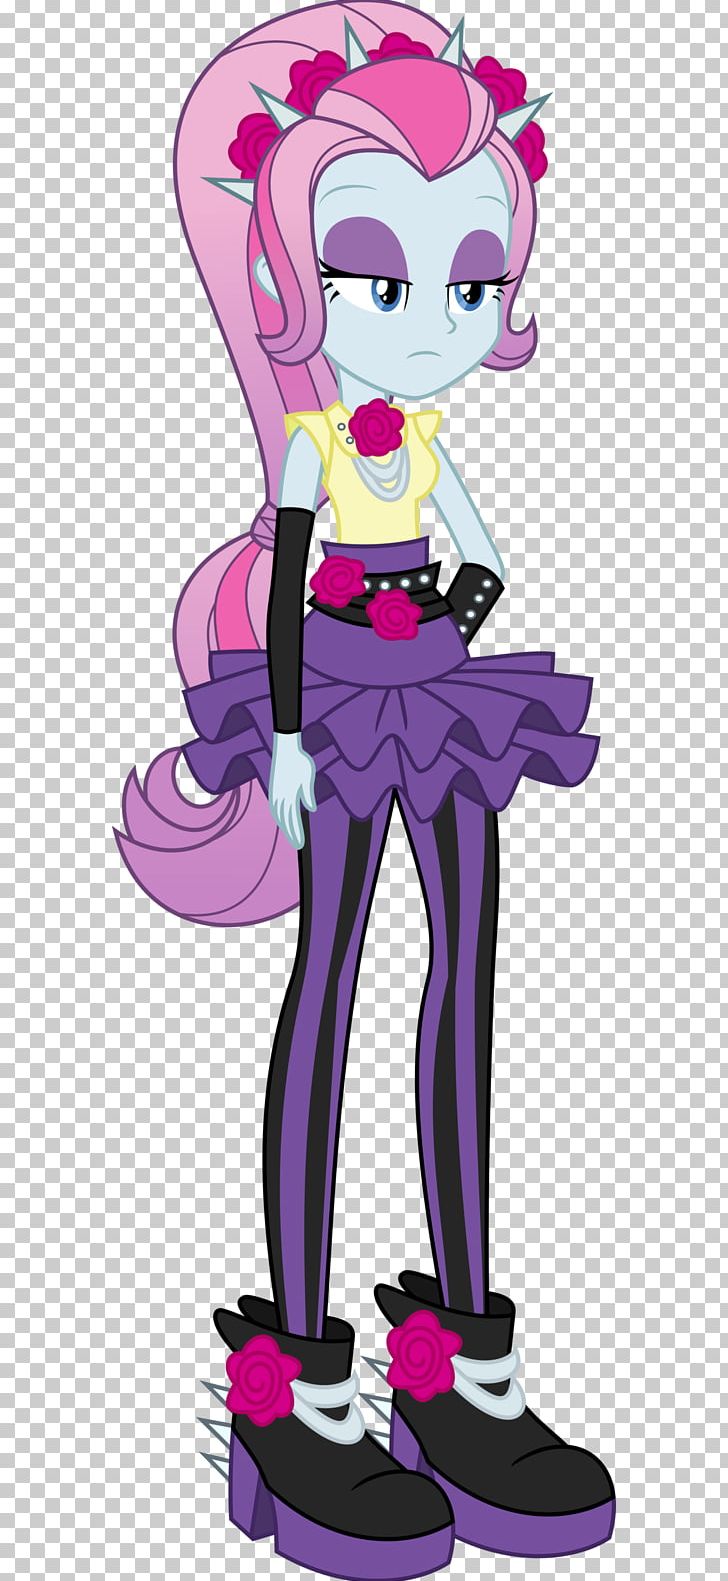 Pinkie Pie Twilight Sparkle Rarity Rainbow Dash Equestria PNG, Clipart, Cartoon, Equestria, Fictional Character, Human, Magenta Free PNG Download